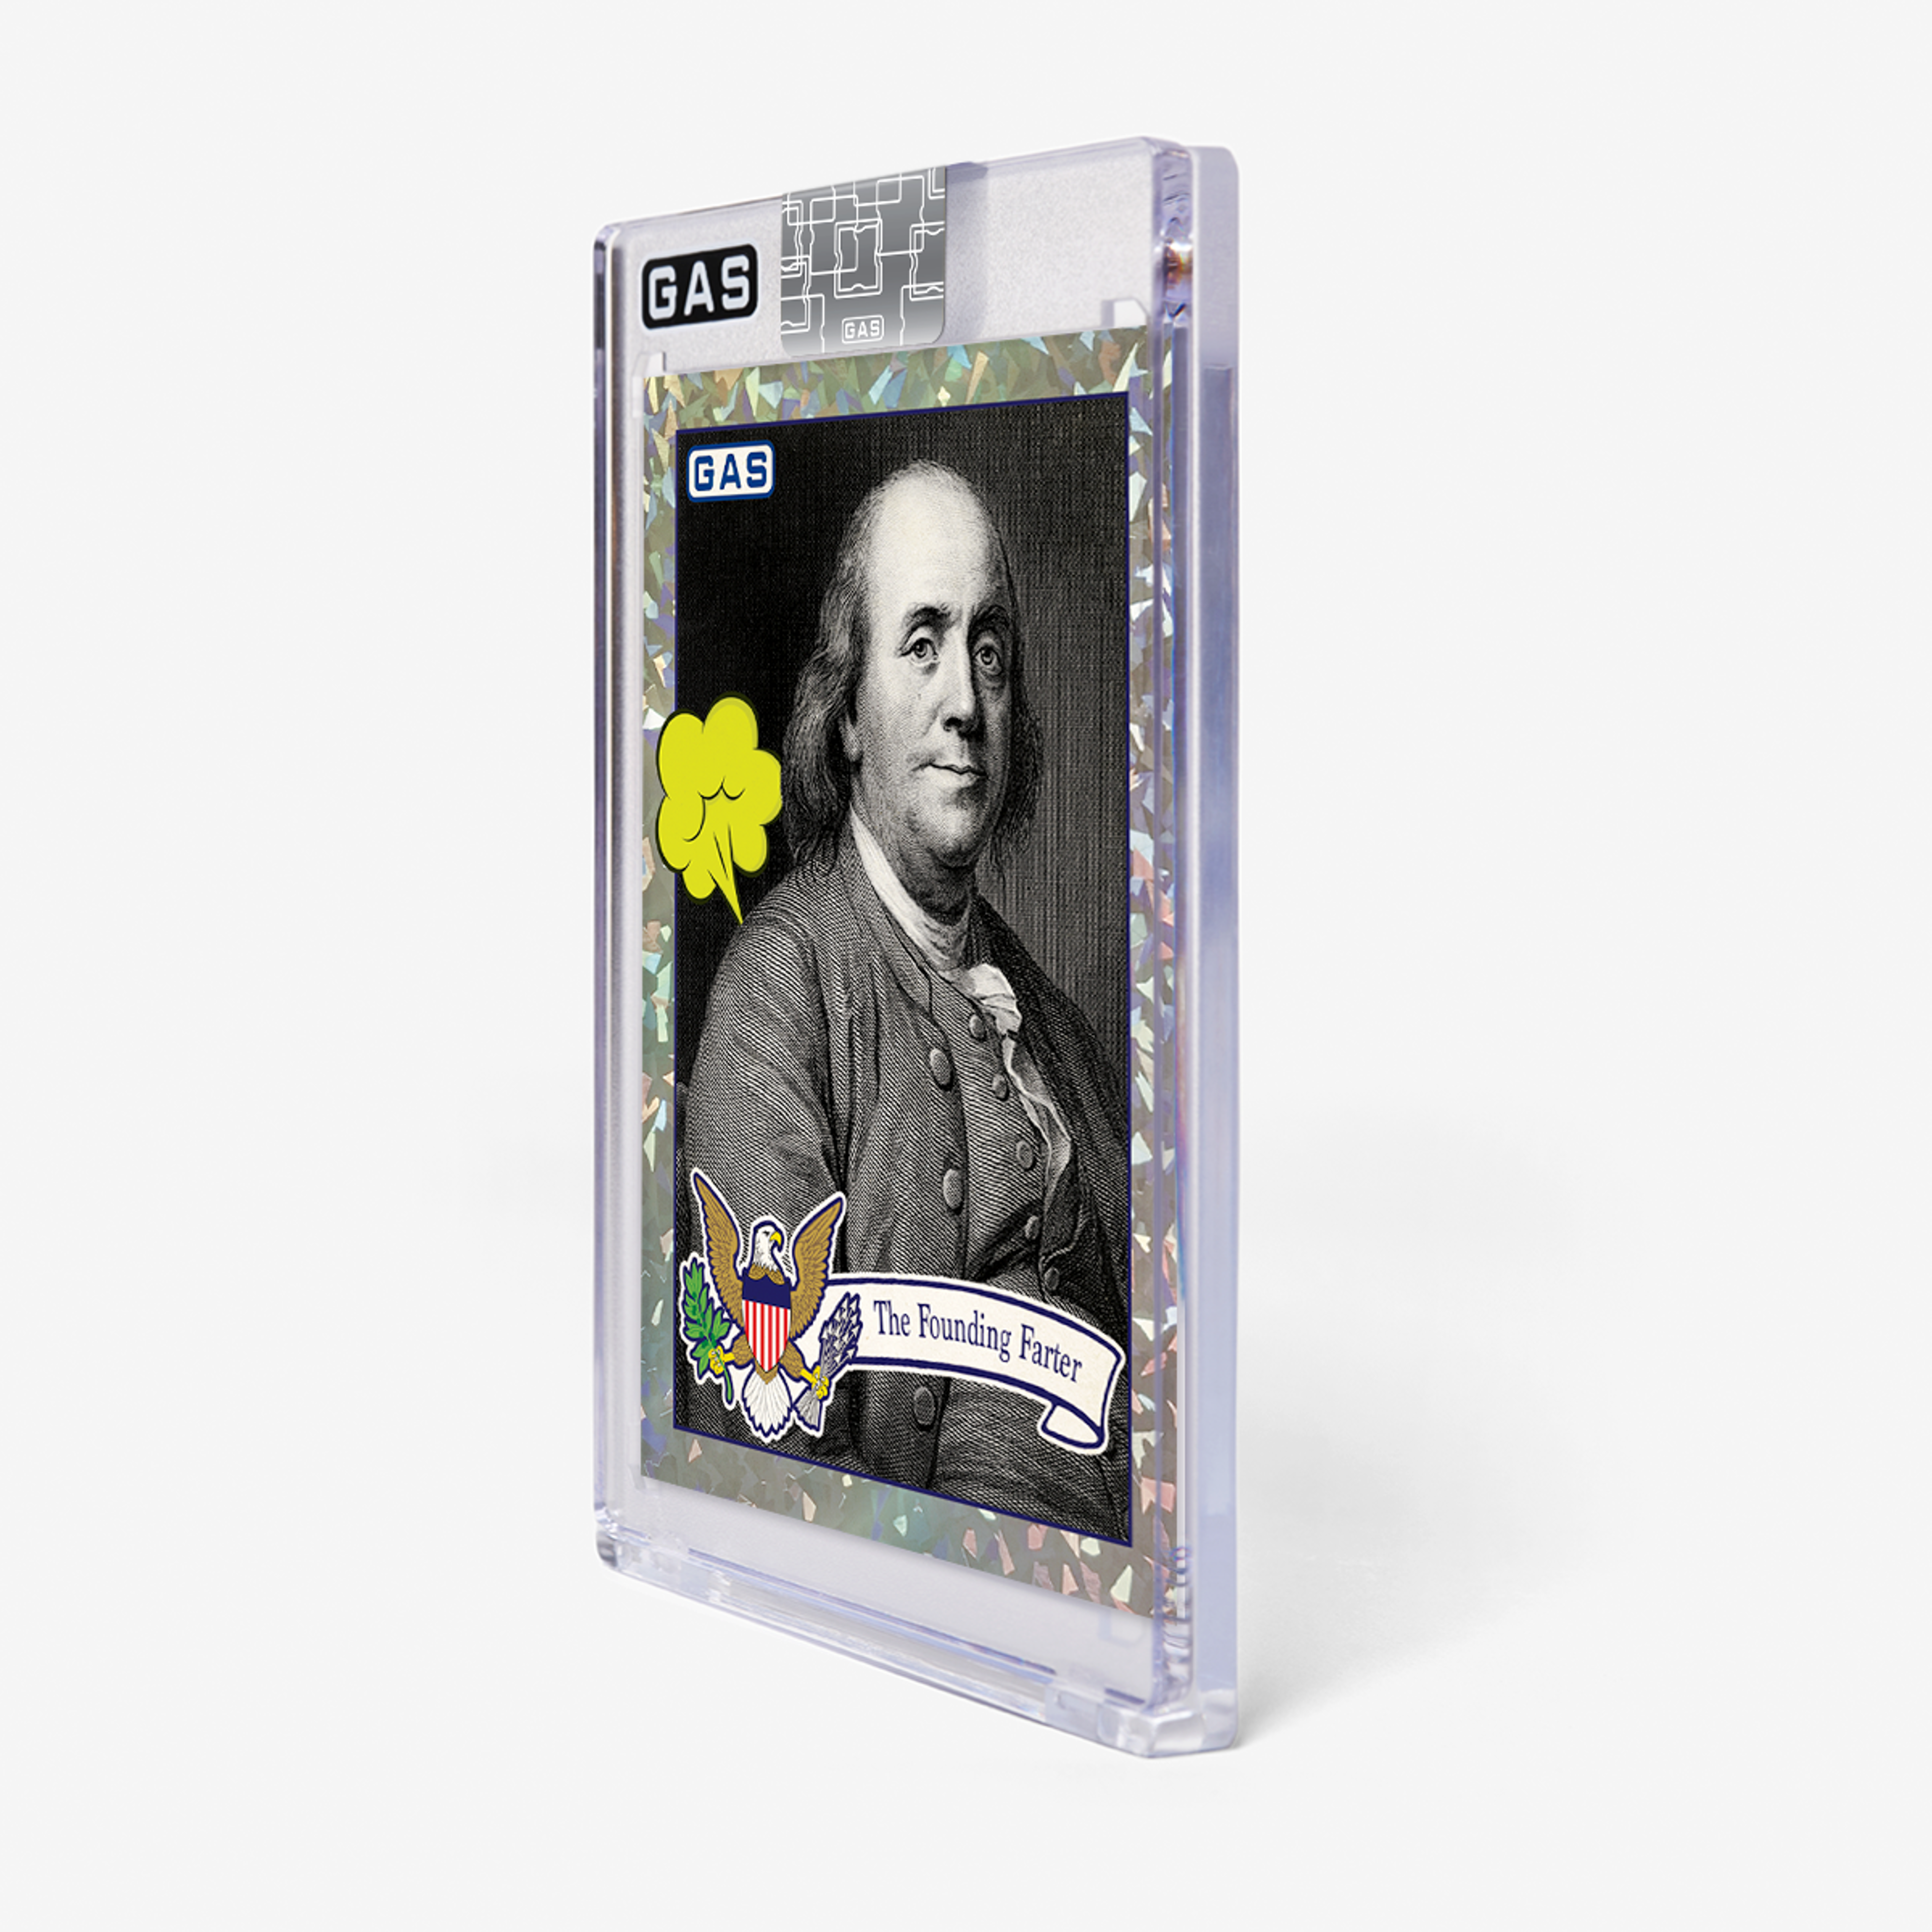 Alternate View 1 of Limited Edition GAS Series 3 #3 The Founding Farter: Benjamin Fr